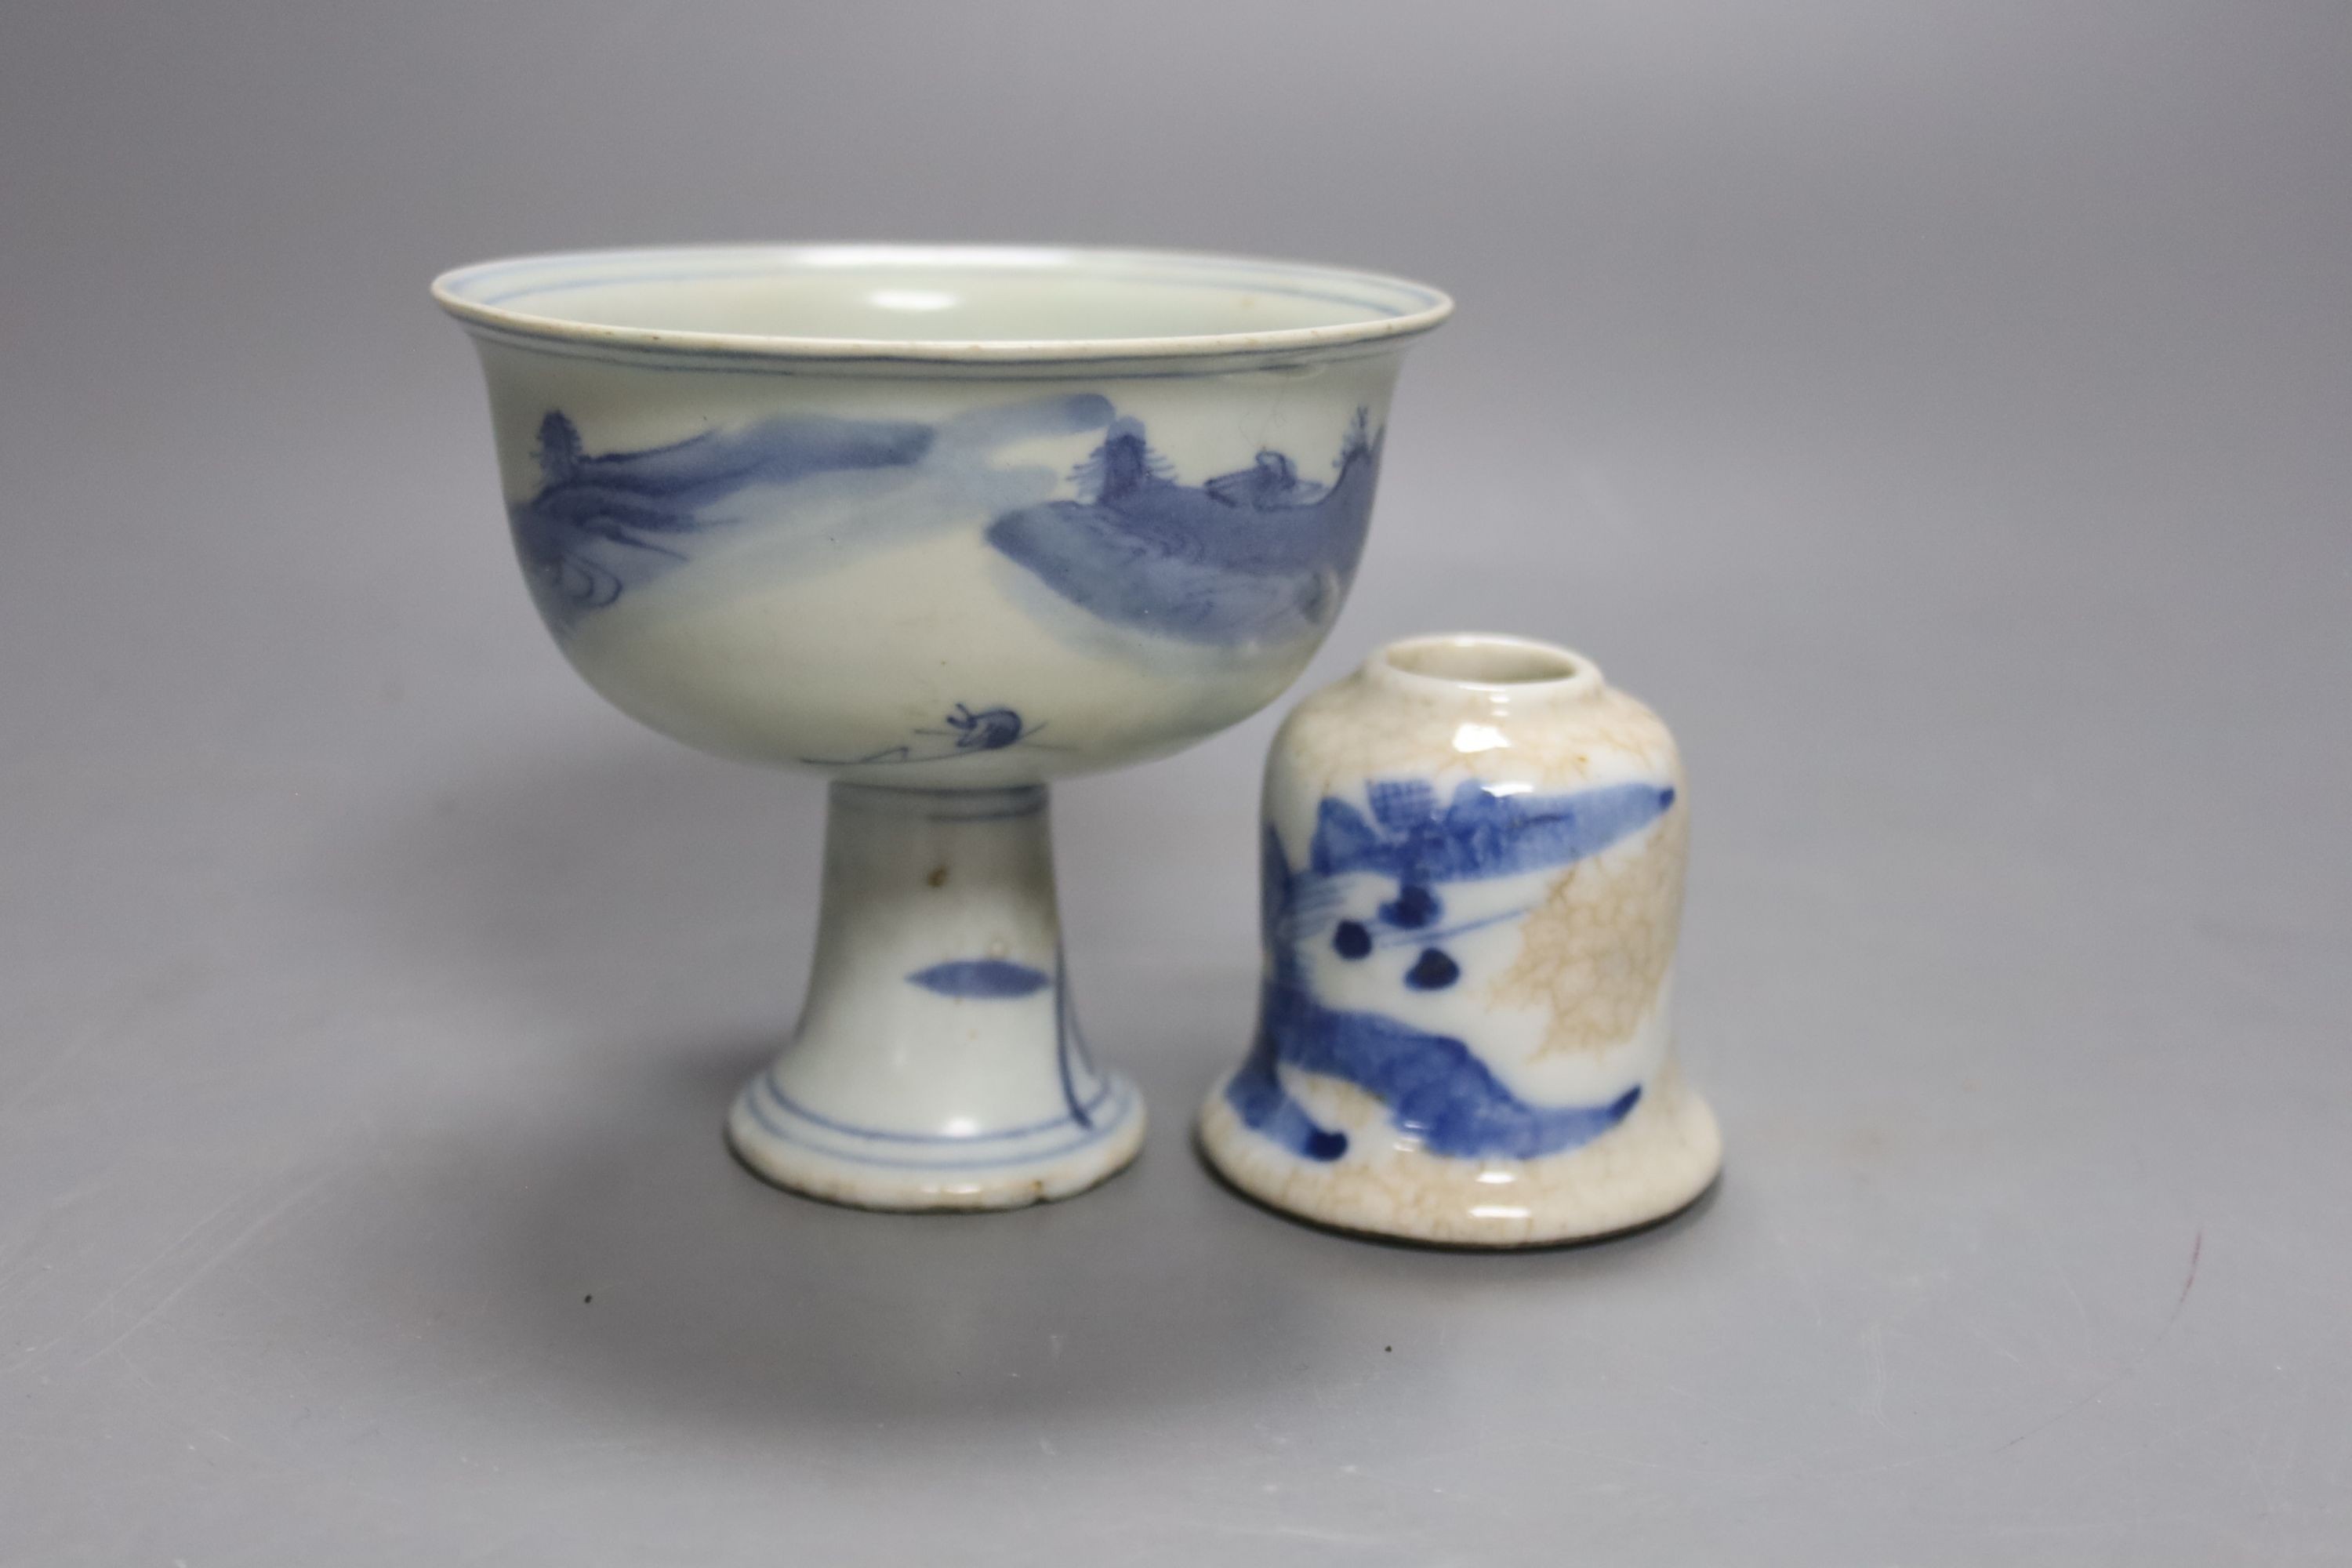 A Chinese stem cup and blue and white brush pot, cup 9 cms high. - Image 2 of 4